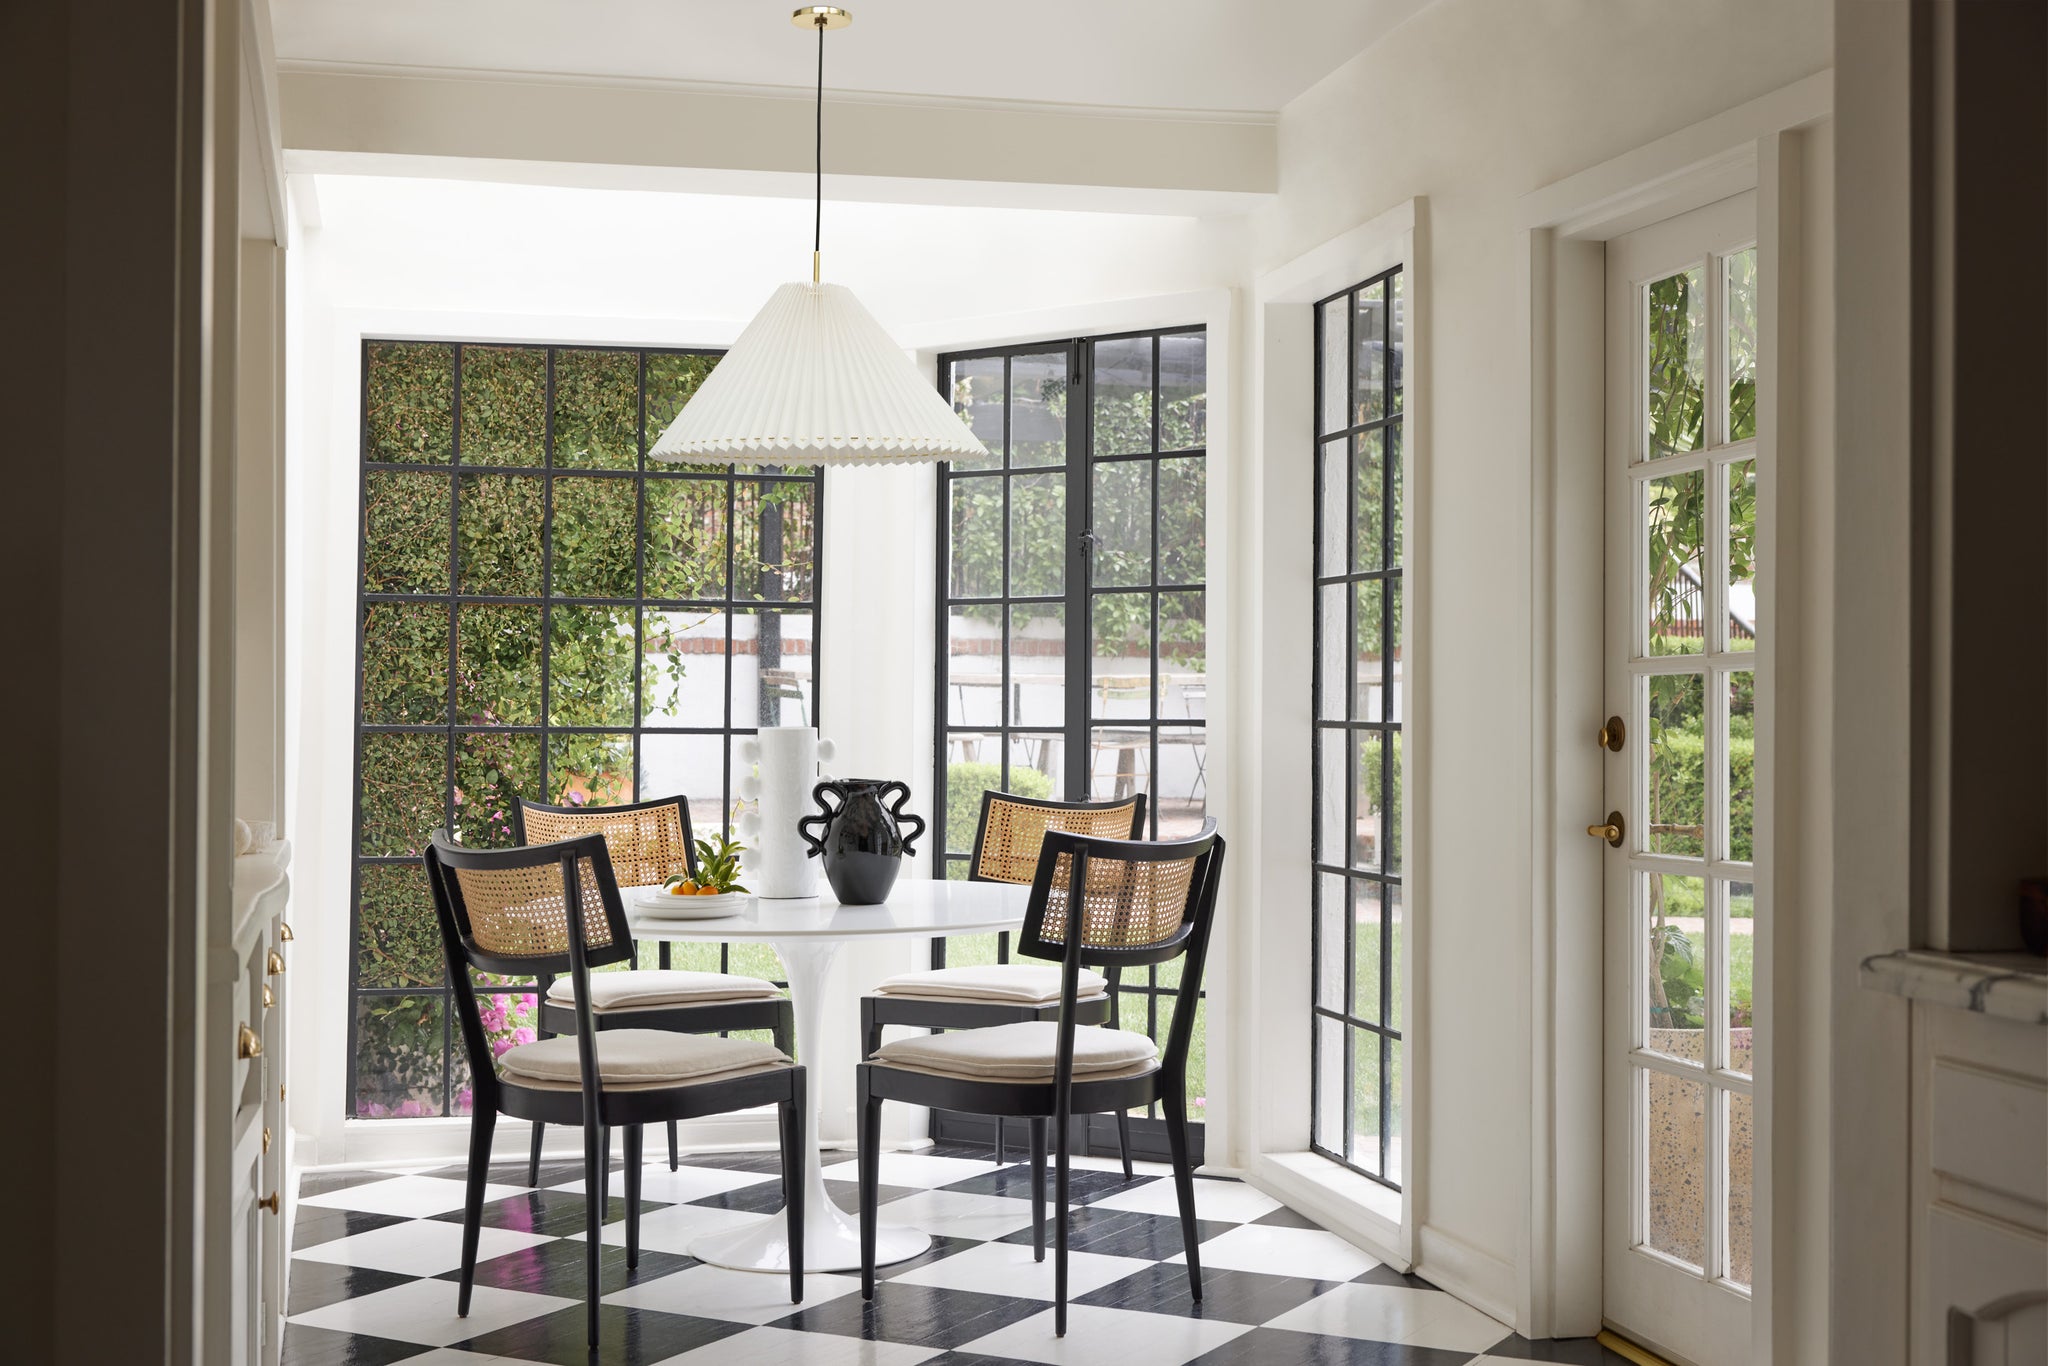 Four black dining chairs with rattan backs and upholstered seats surround a white round table in a kitchen dining nook. A white cylindrical vase and shiny black vase sit on top of the table.